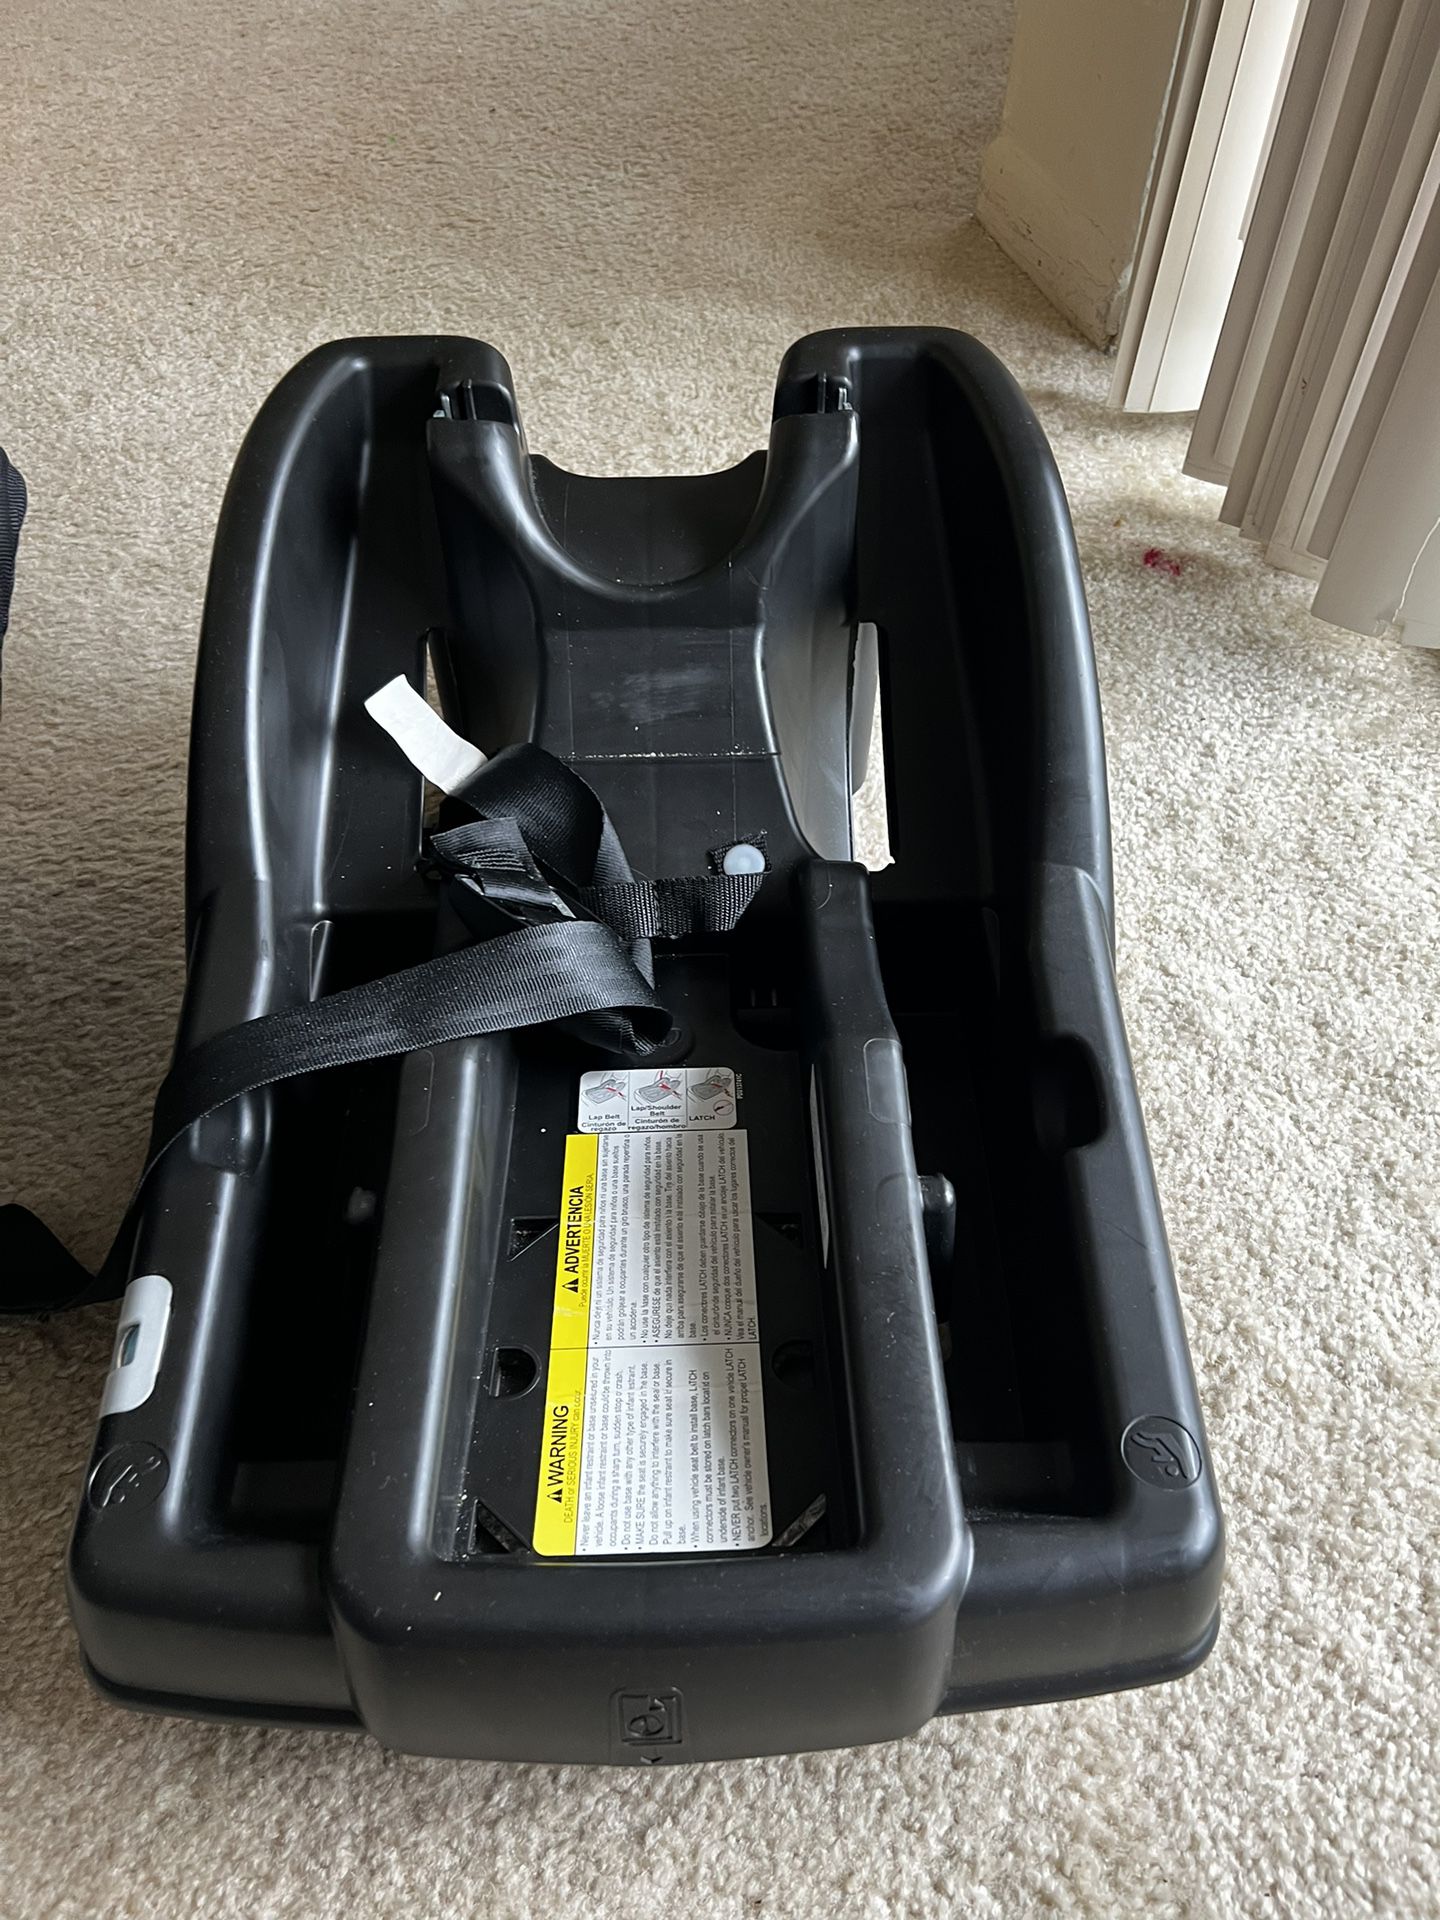 Graco Infant Car Seat With Base $30